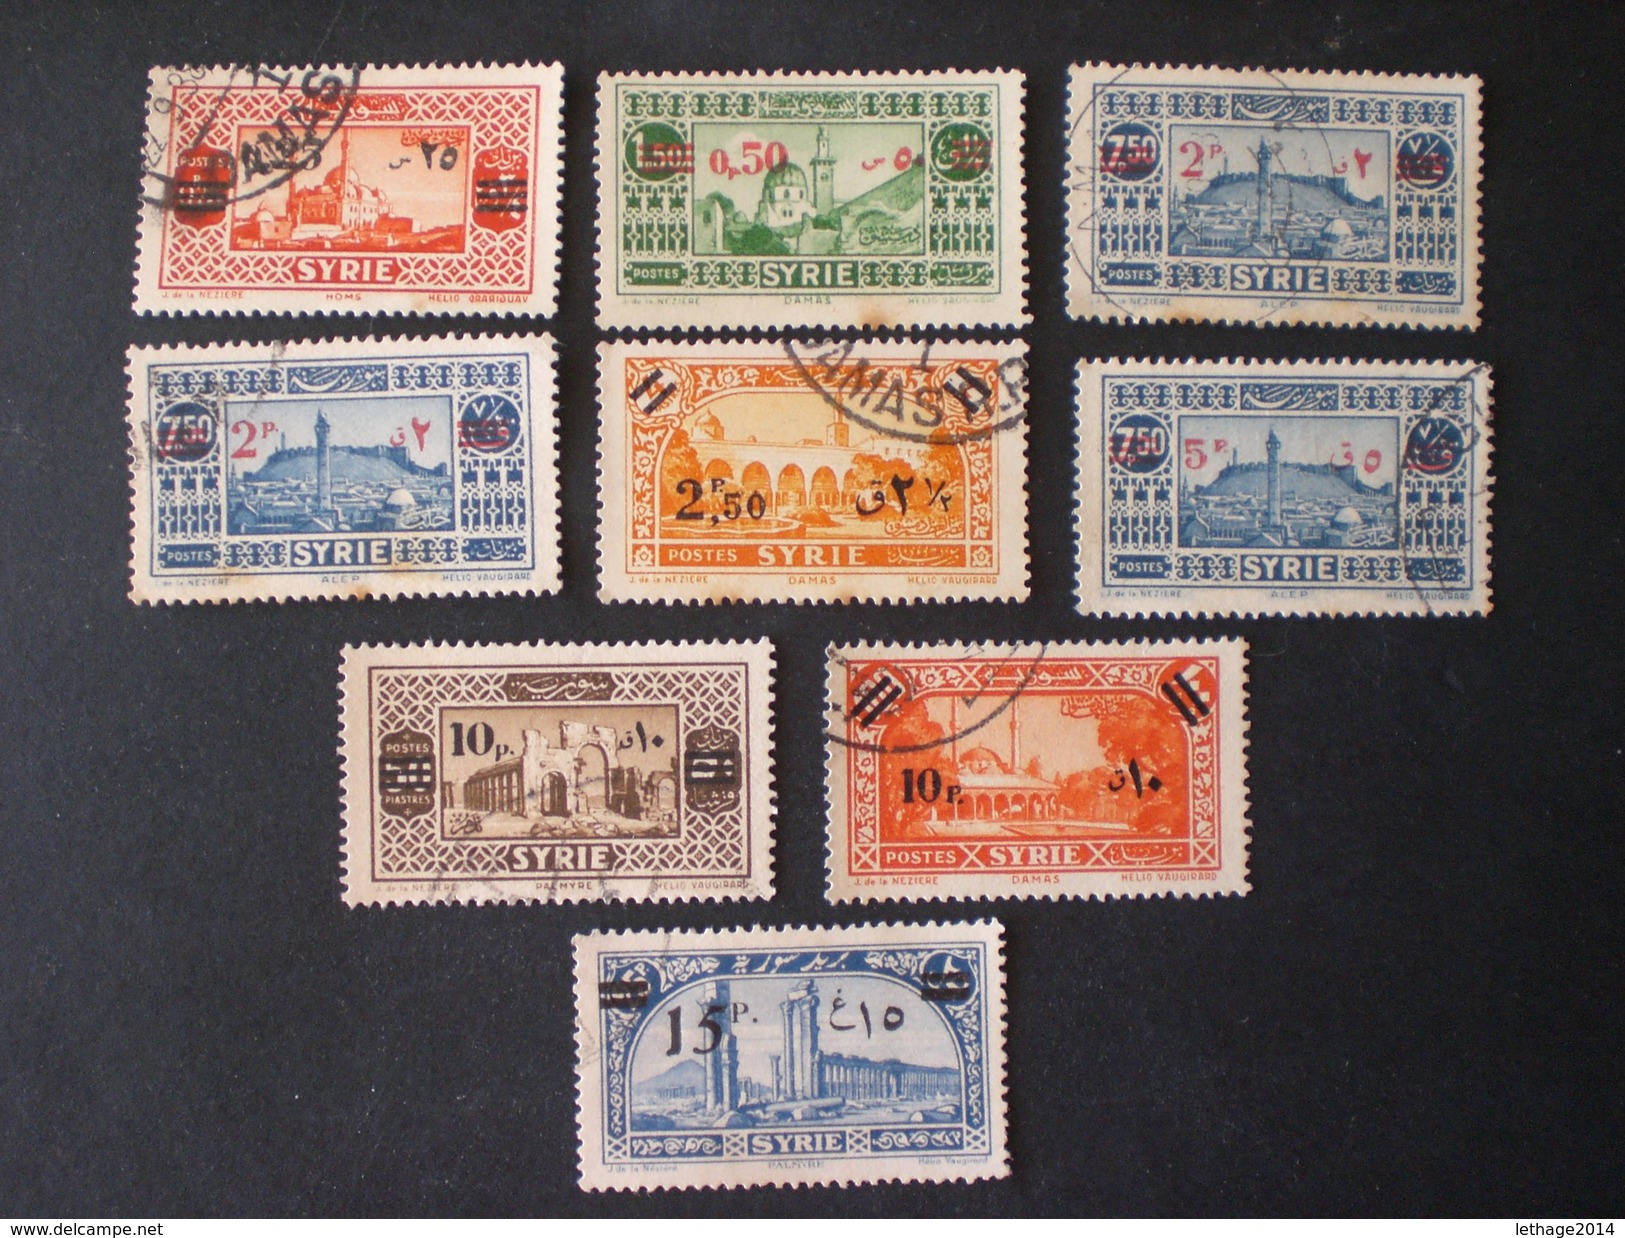 SYRIE SYRIA 1920 French Postage Stamps Surcharged & Overprinted "O.M.F. - Syrie" ++ 54 PHOTO